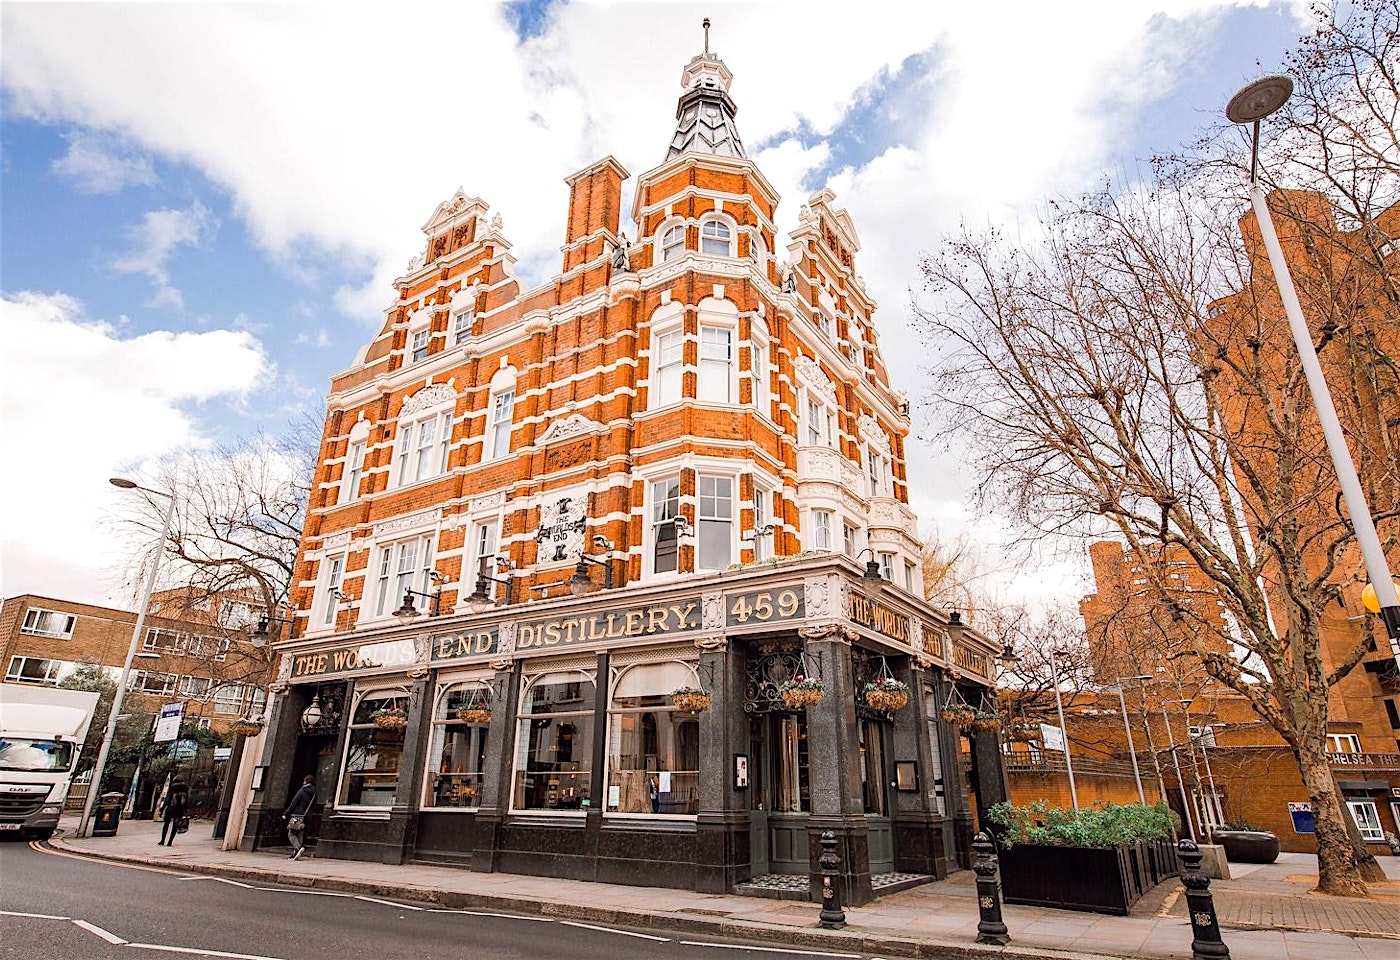 exterior of the worlds end market distillery chelsea london bar